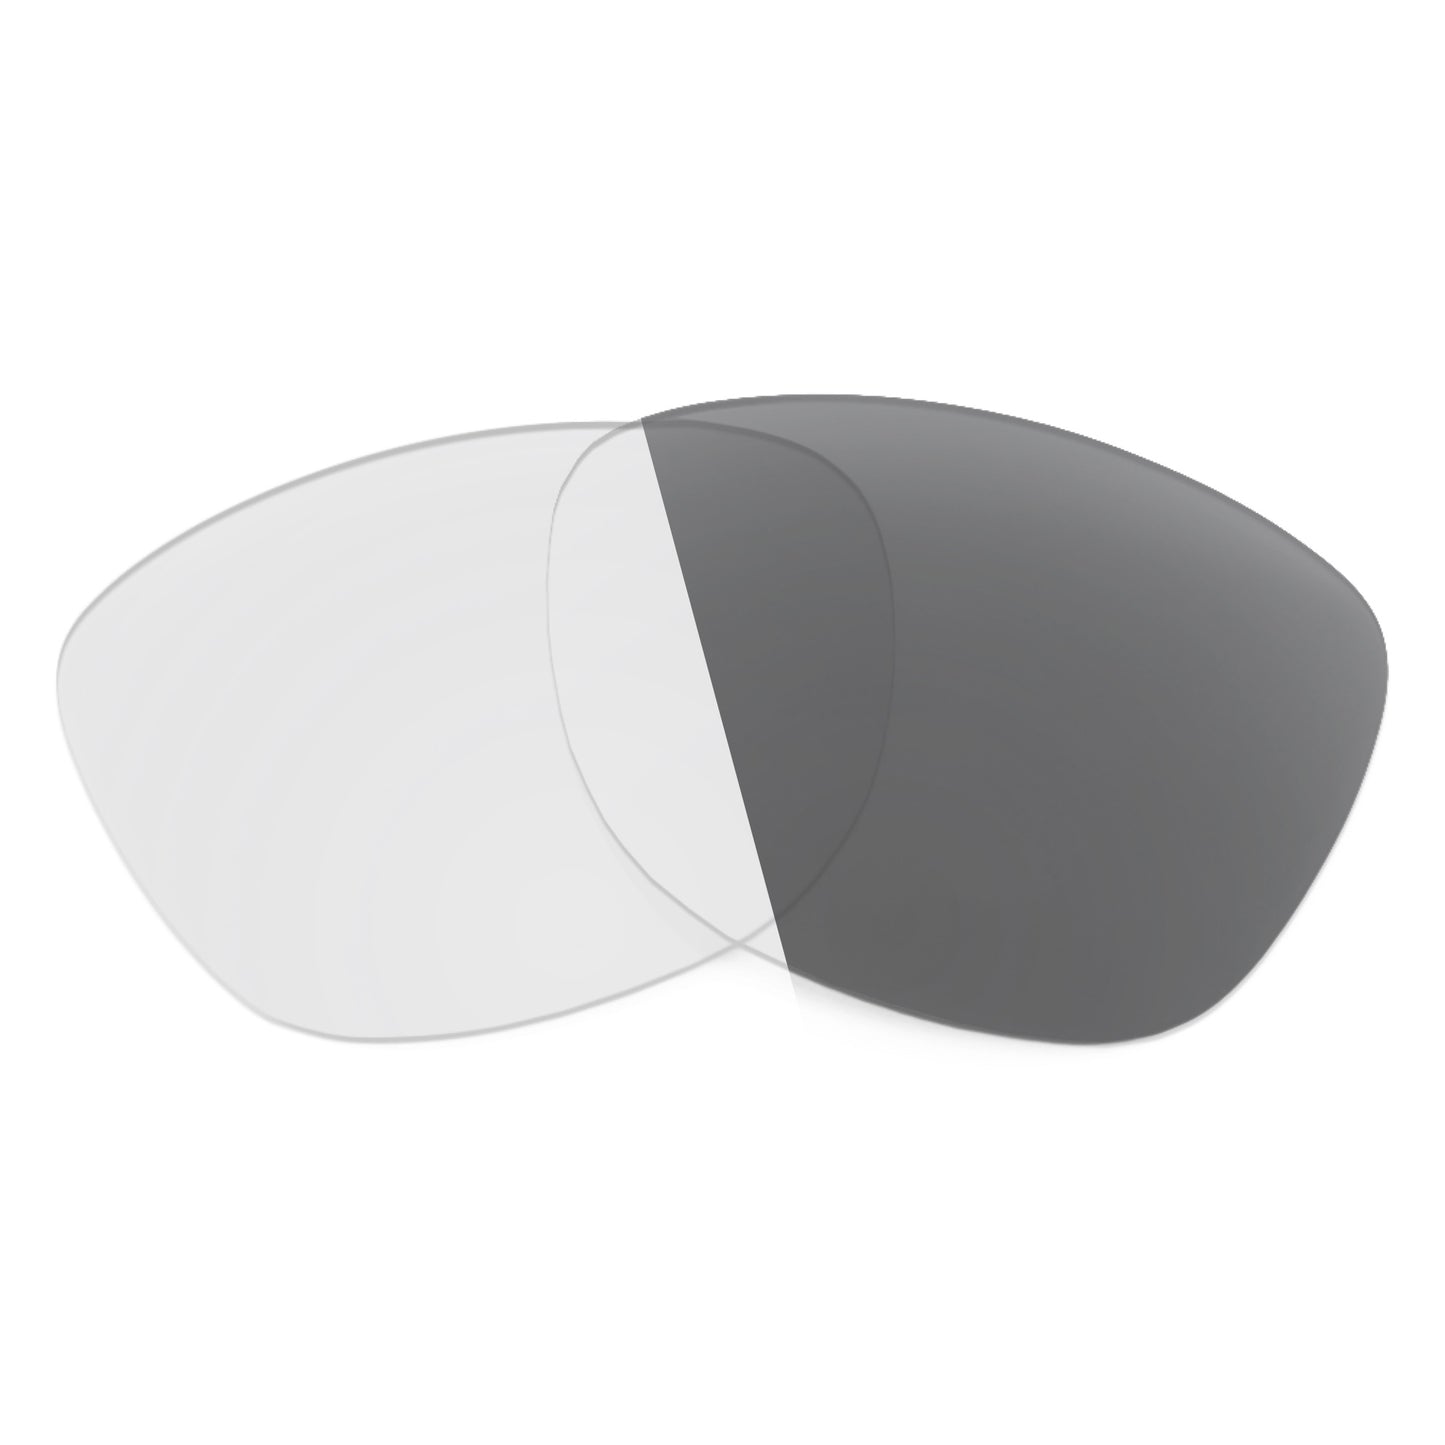 Revant replacement lenses for Costa Apalach Non-Polarized Adapt Gray Photochromic